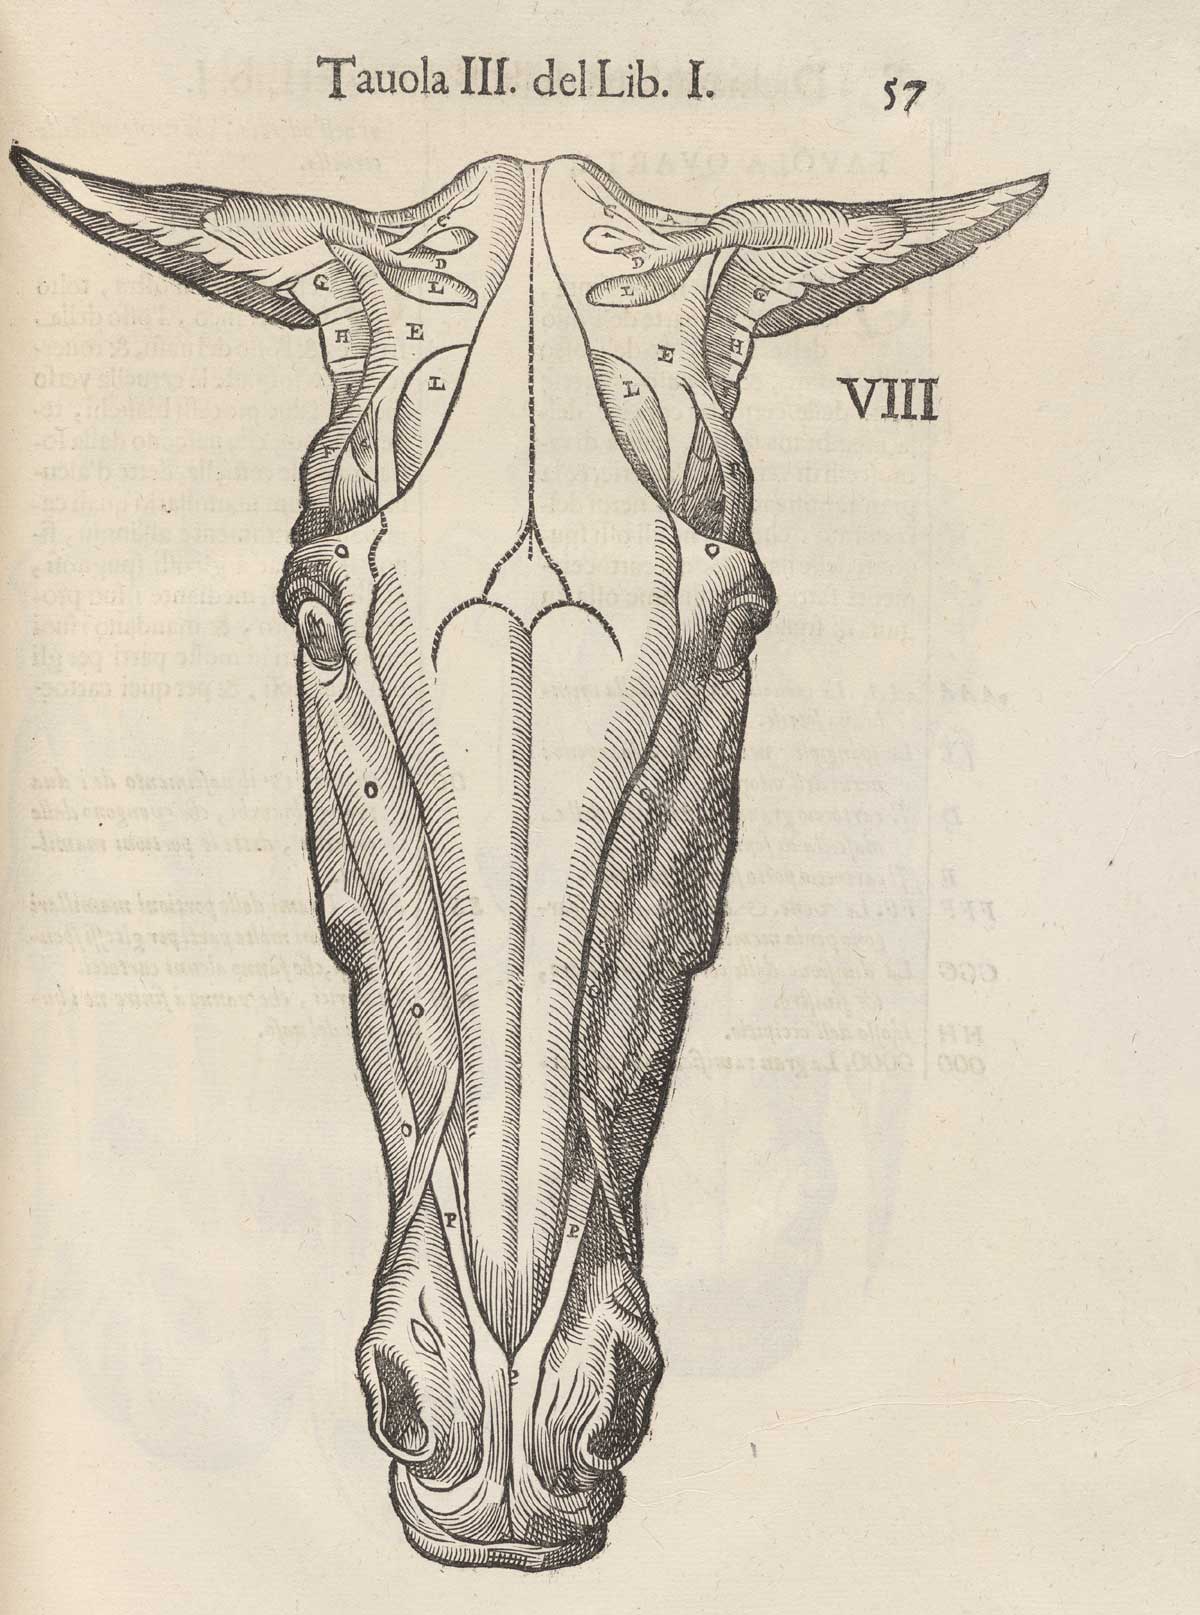 Page 57 of Ruini's Anatomia del cavallo, infermità, et suoi rimedii, featuring the front view of the flayed head of a horse displaying the muscles of the head.